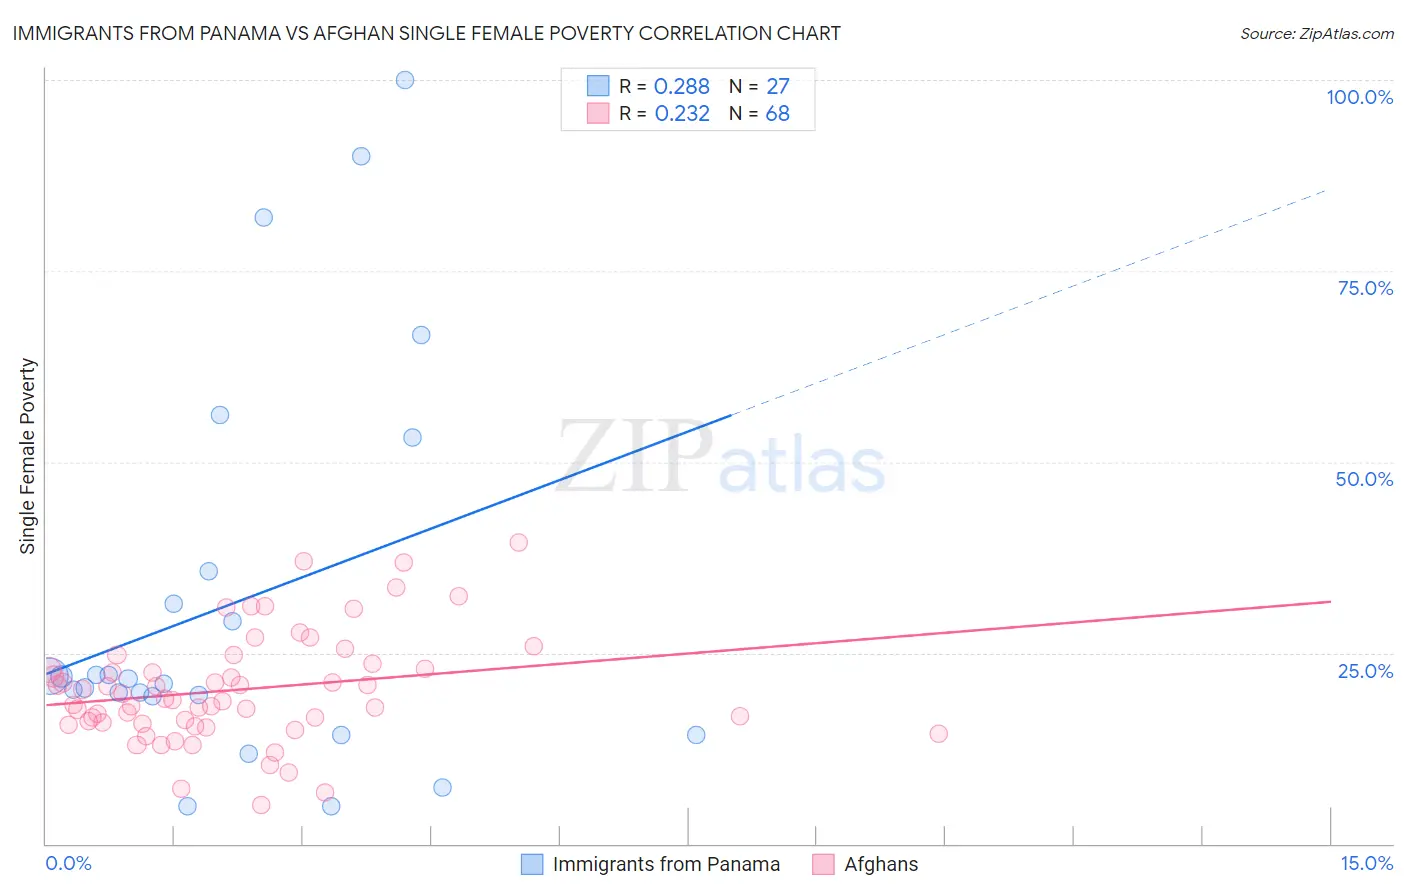 Immigrants from Panama vs Afghan Single Female Poverty